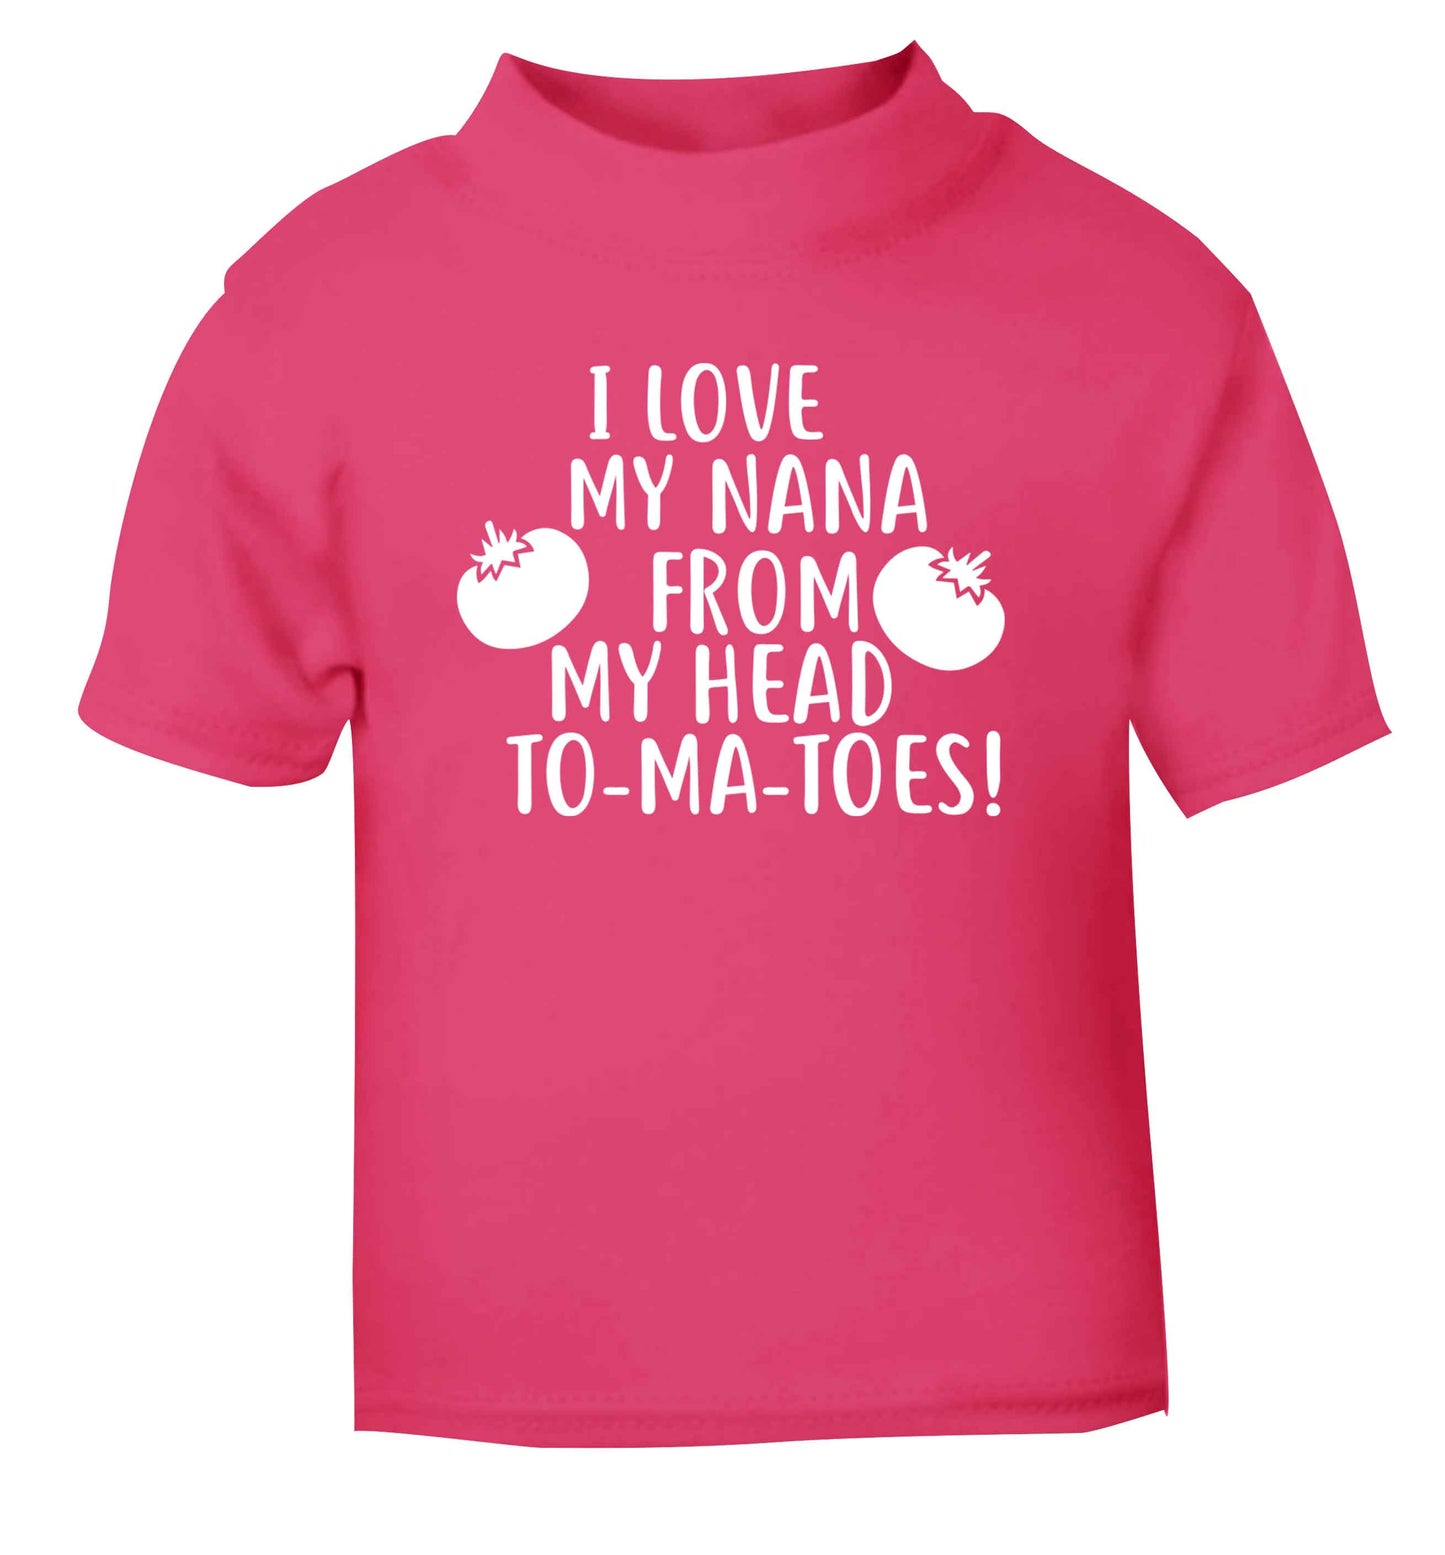 I love my nana from my head to-ma-toes pink Baby Toddler Tshirt 2 Years